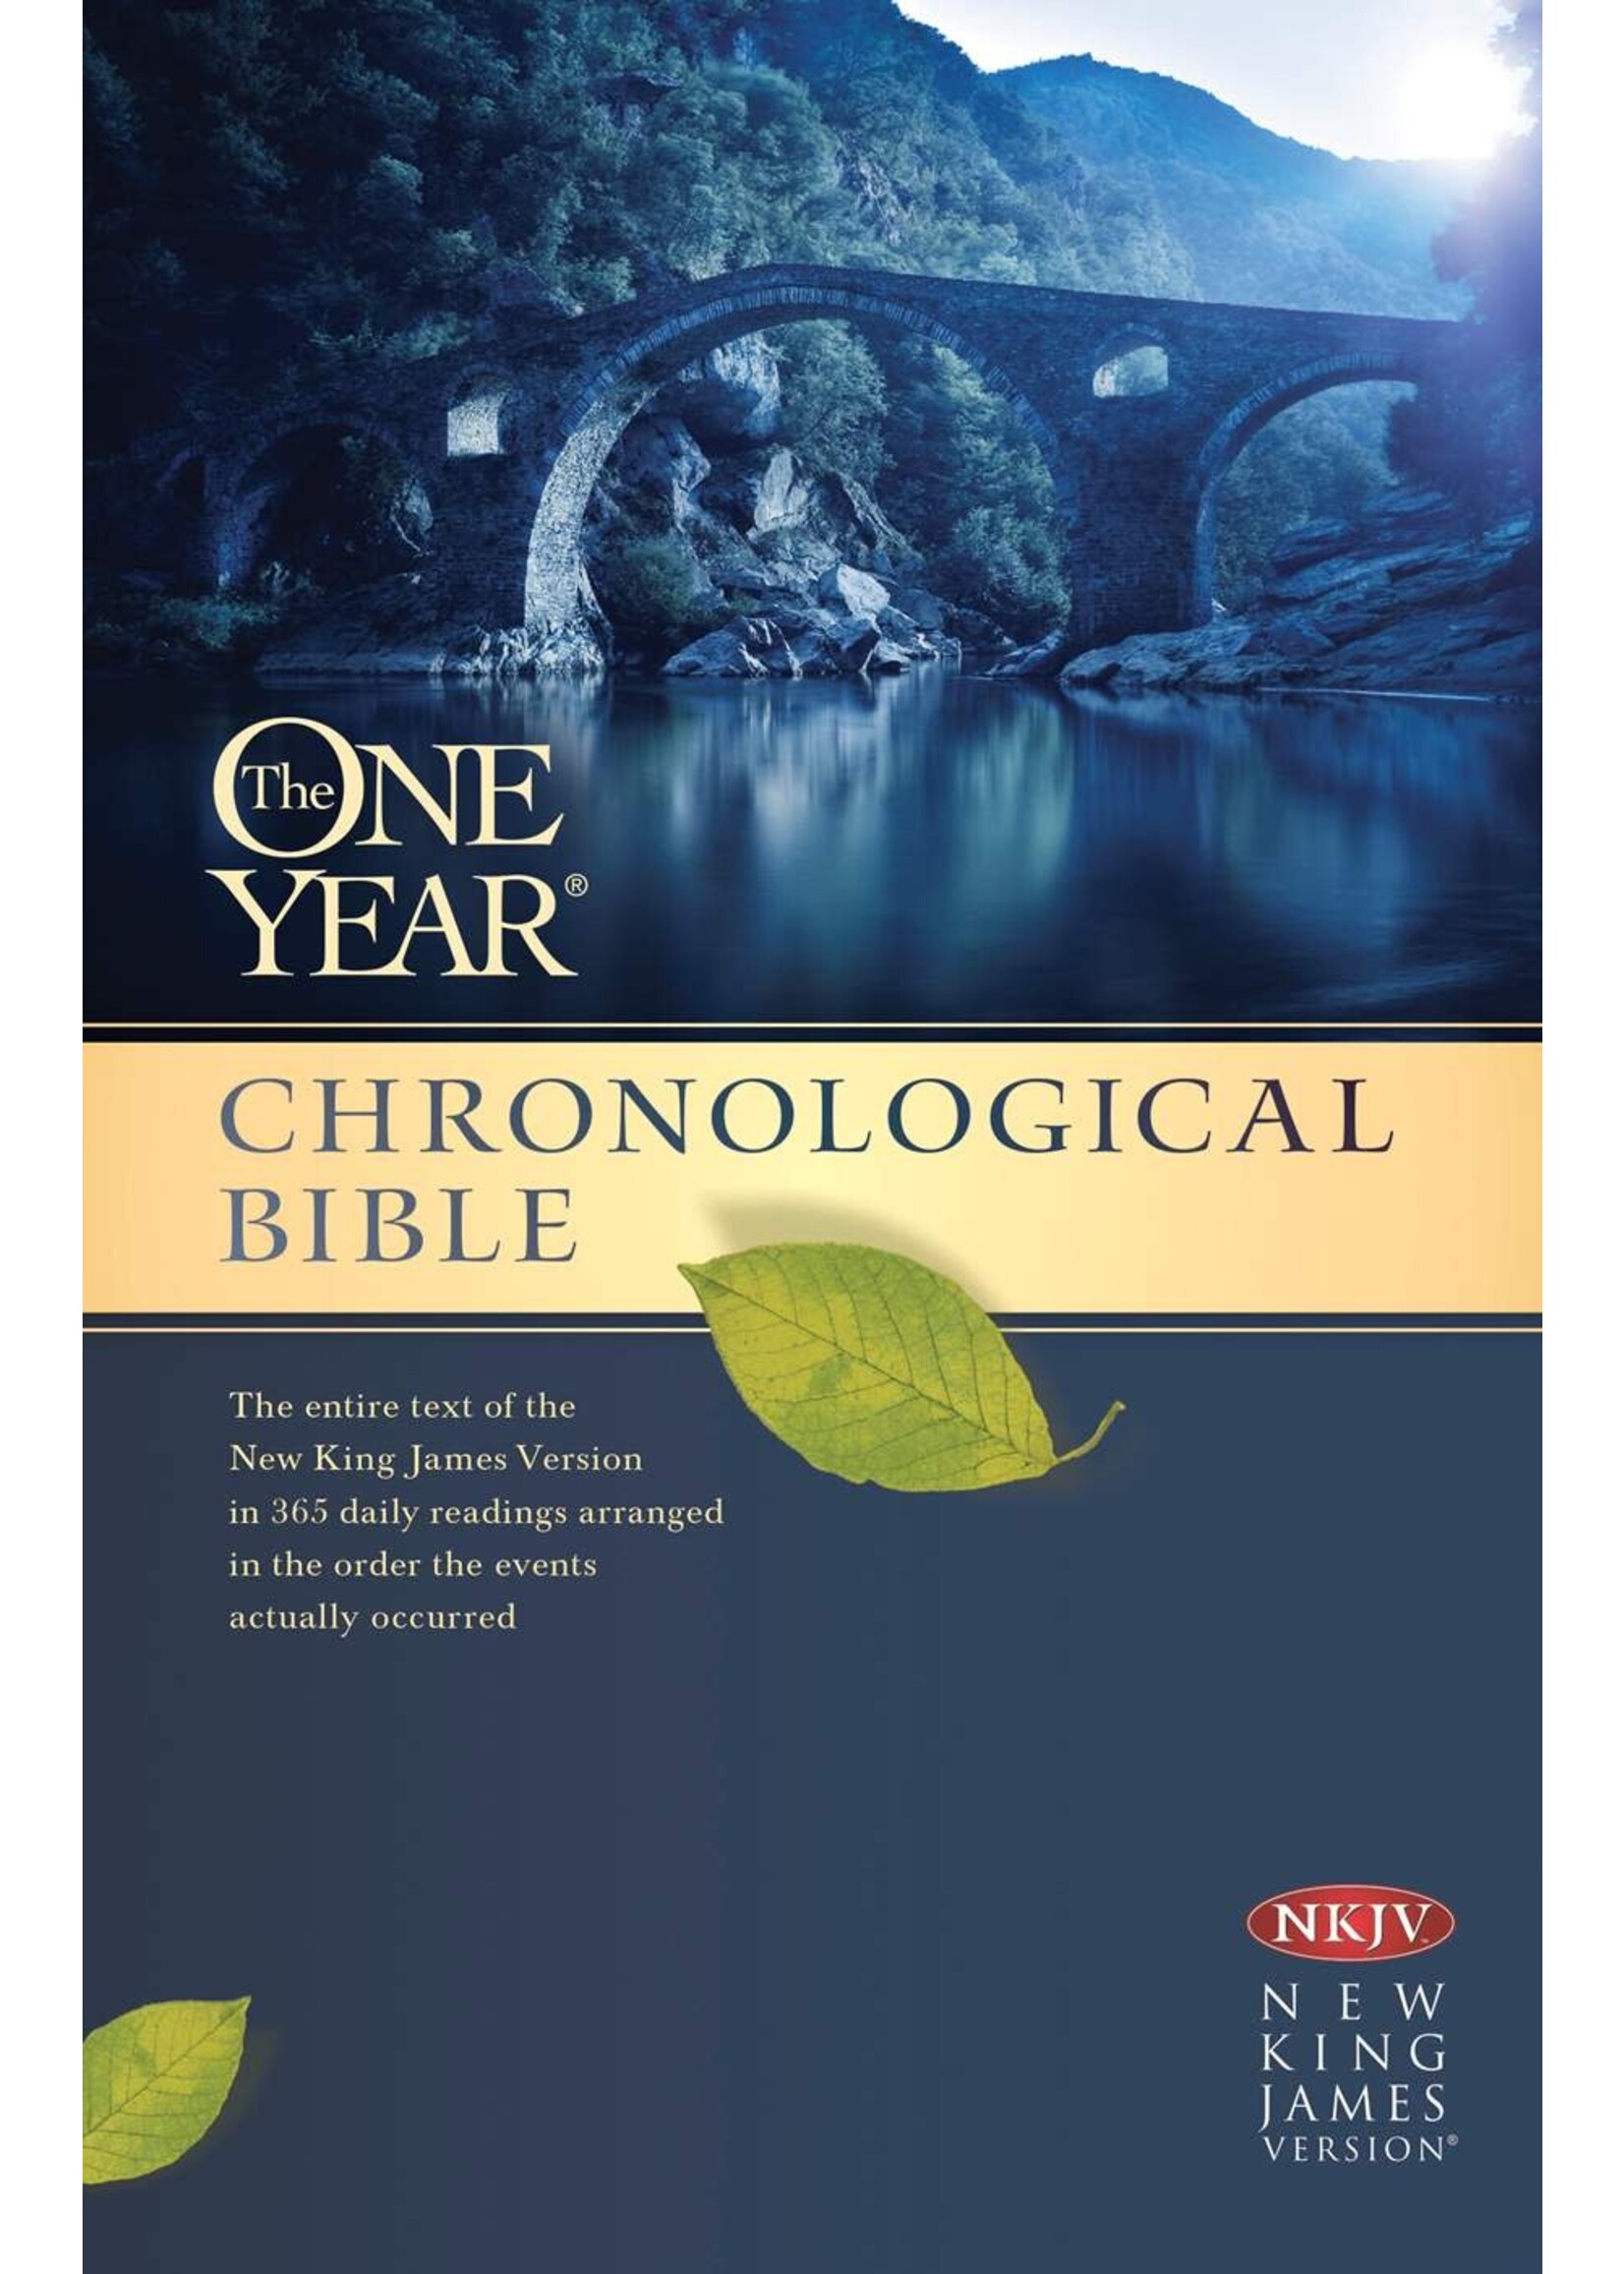 The One Year Chronological Bible NKJV